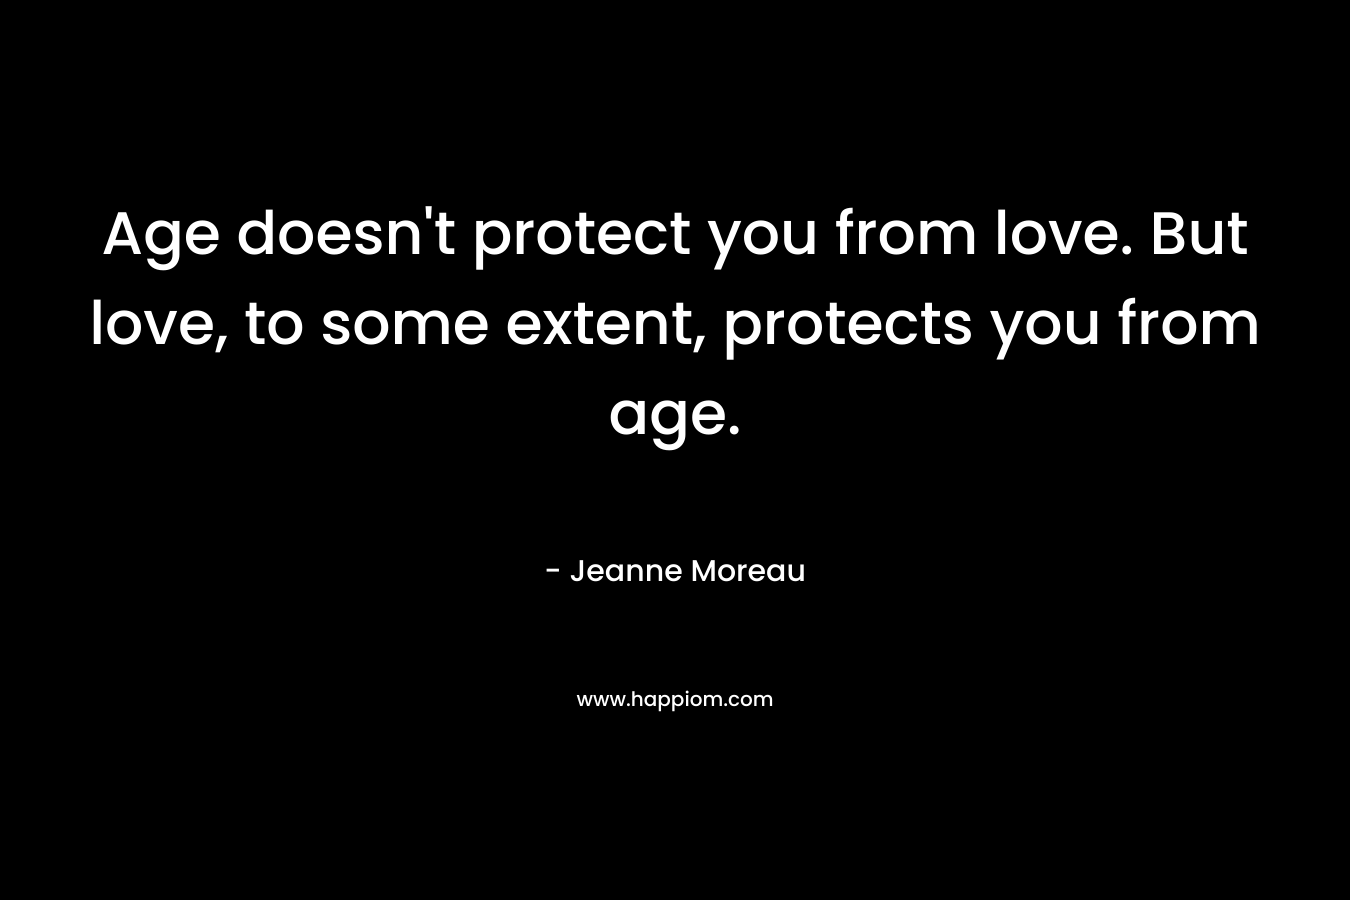 Age doesn't protect you from love. But love, to some extent, protects you from age.